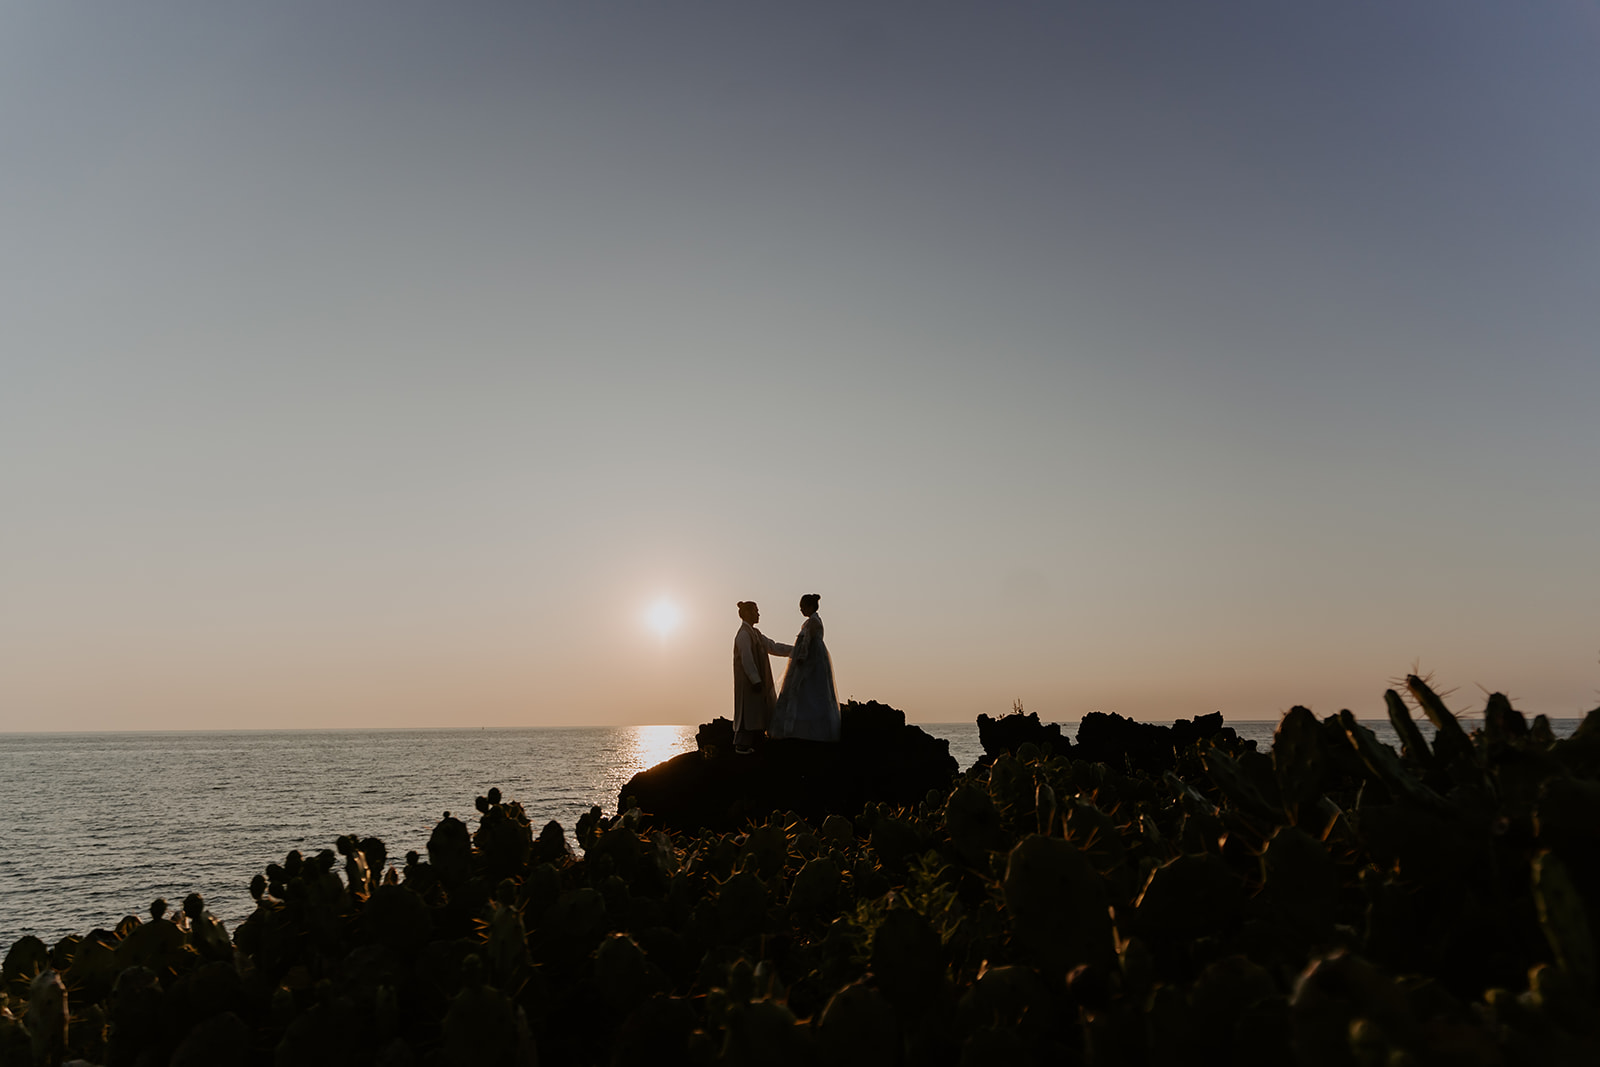 A pre-wedding couple standing while holding hands on a rock overlooking the ocean in Korea during sunset.